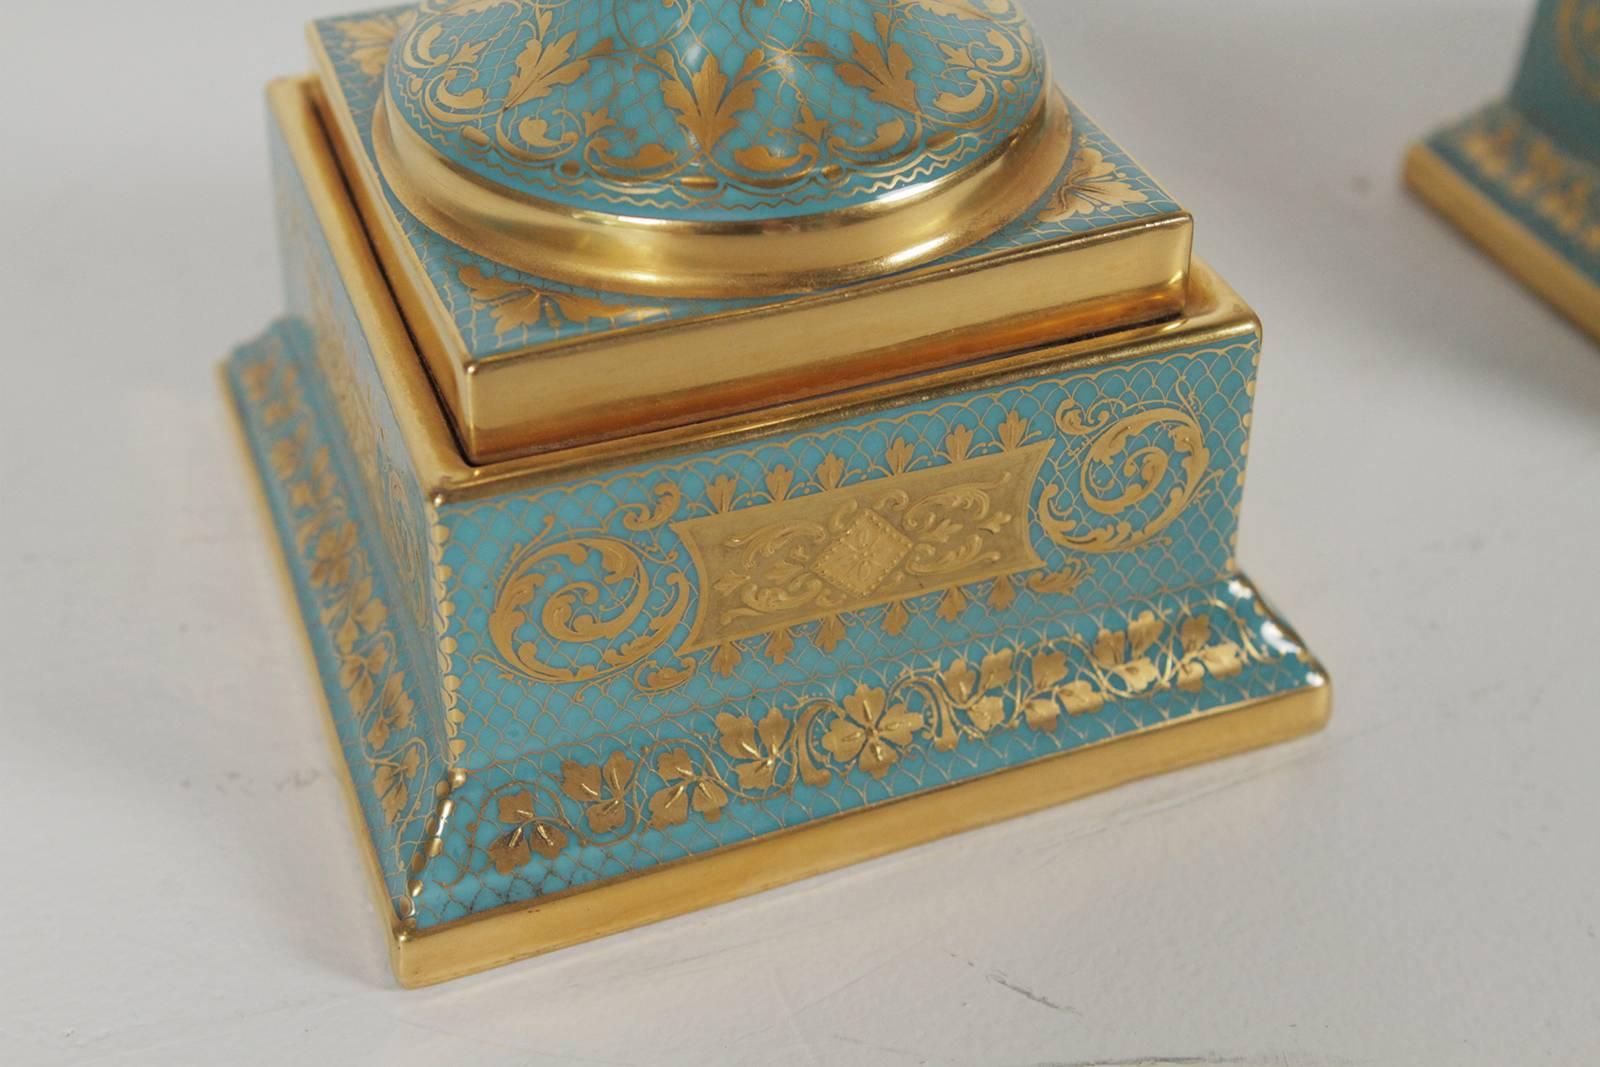 Austrian Pair of Late 19th Century Hand-Painted and Gilt Urns